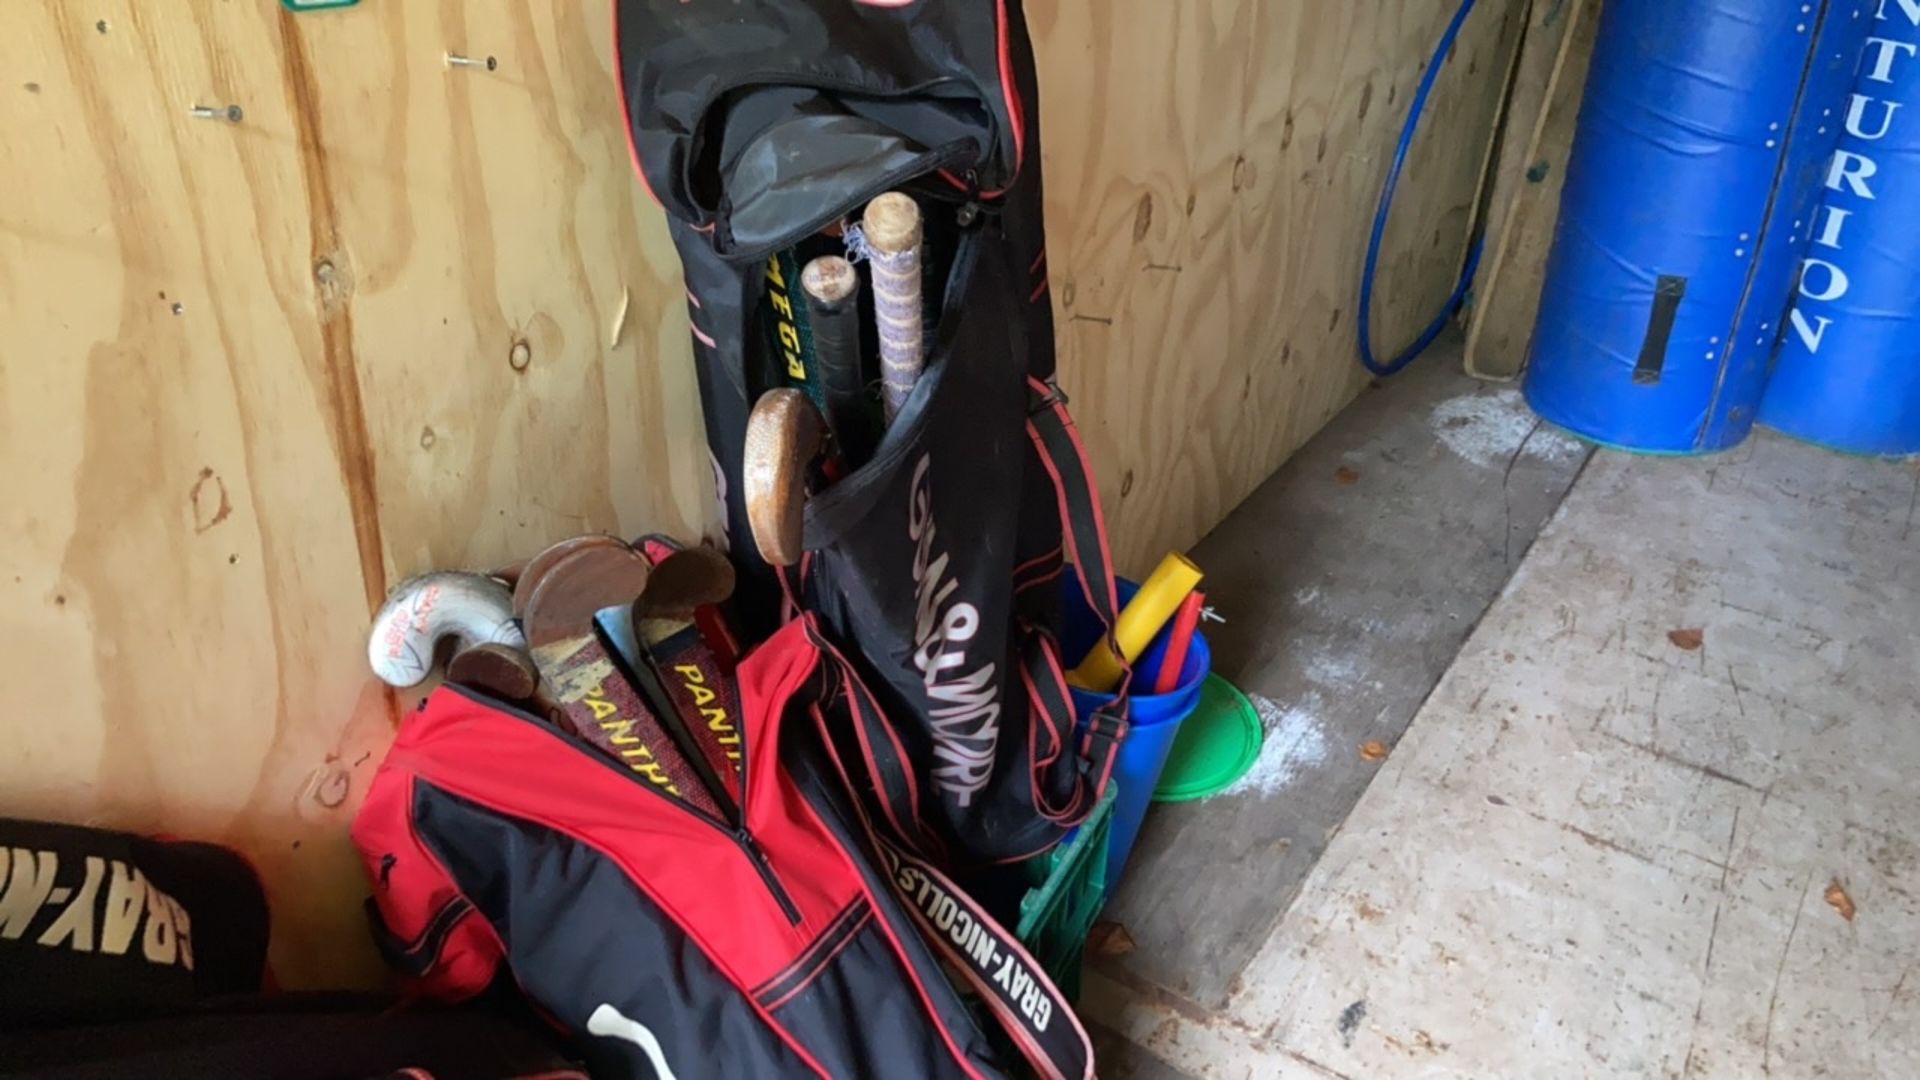 Shipping Container And Sports Equipment - Image 11 of 14